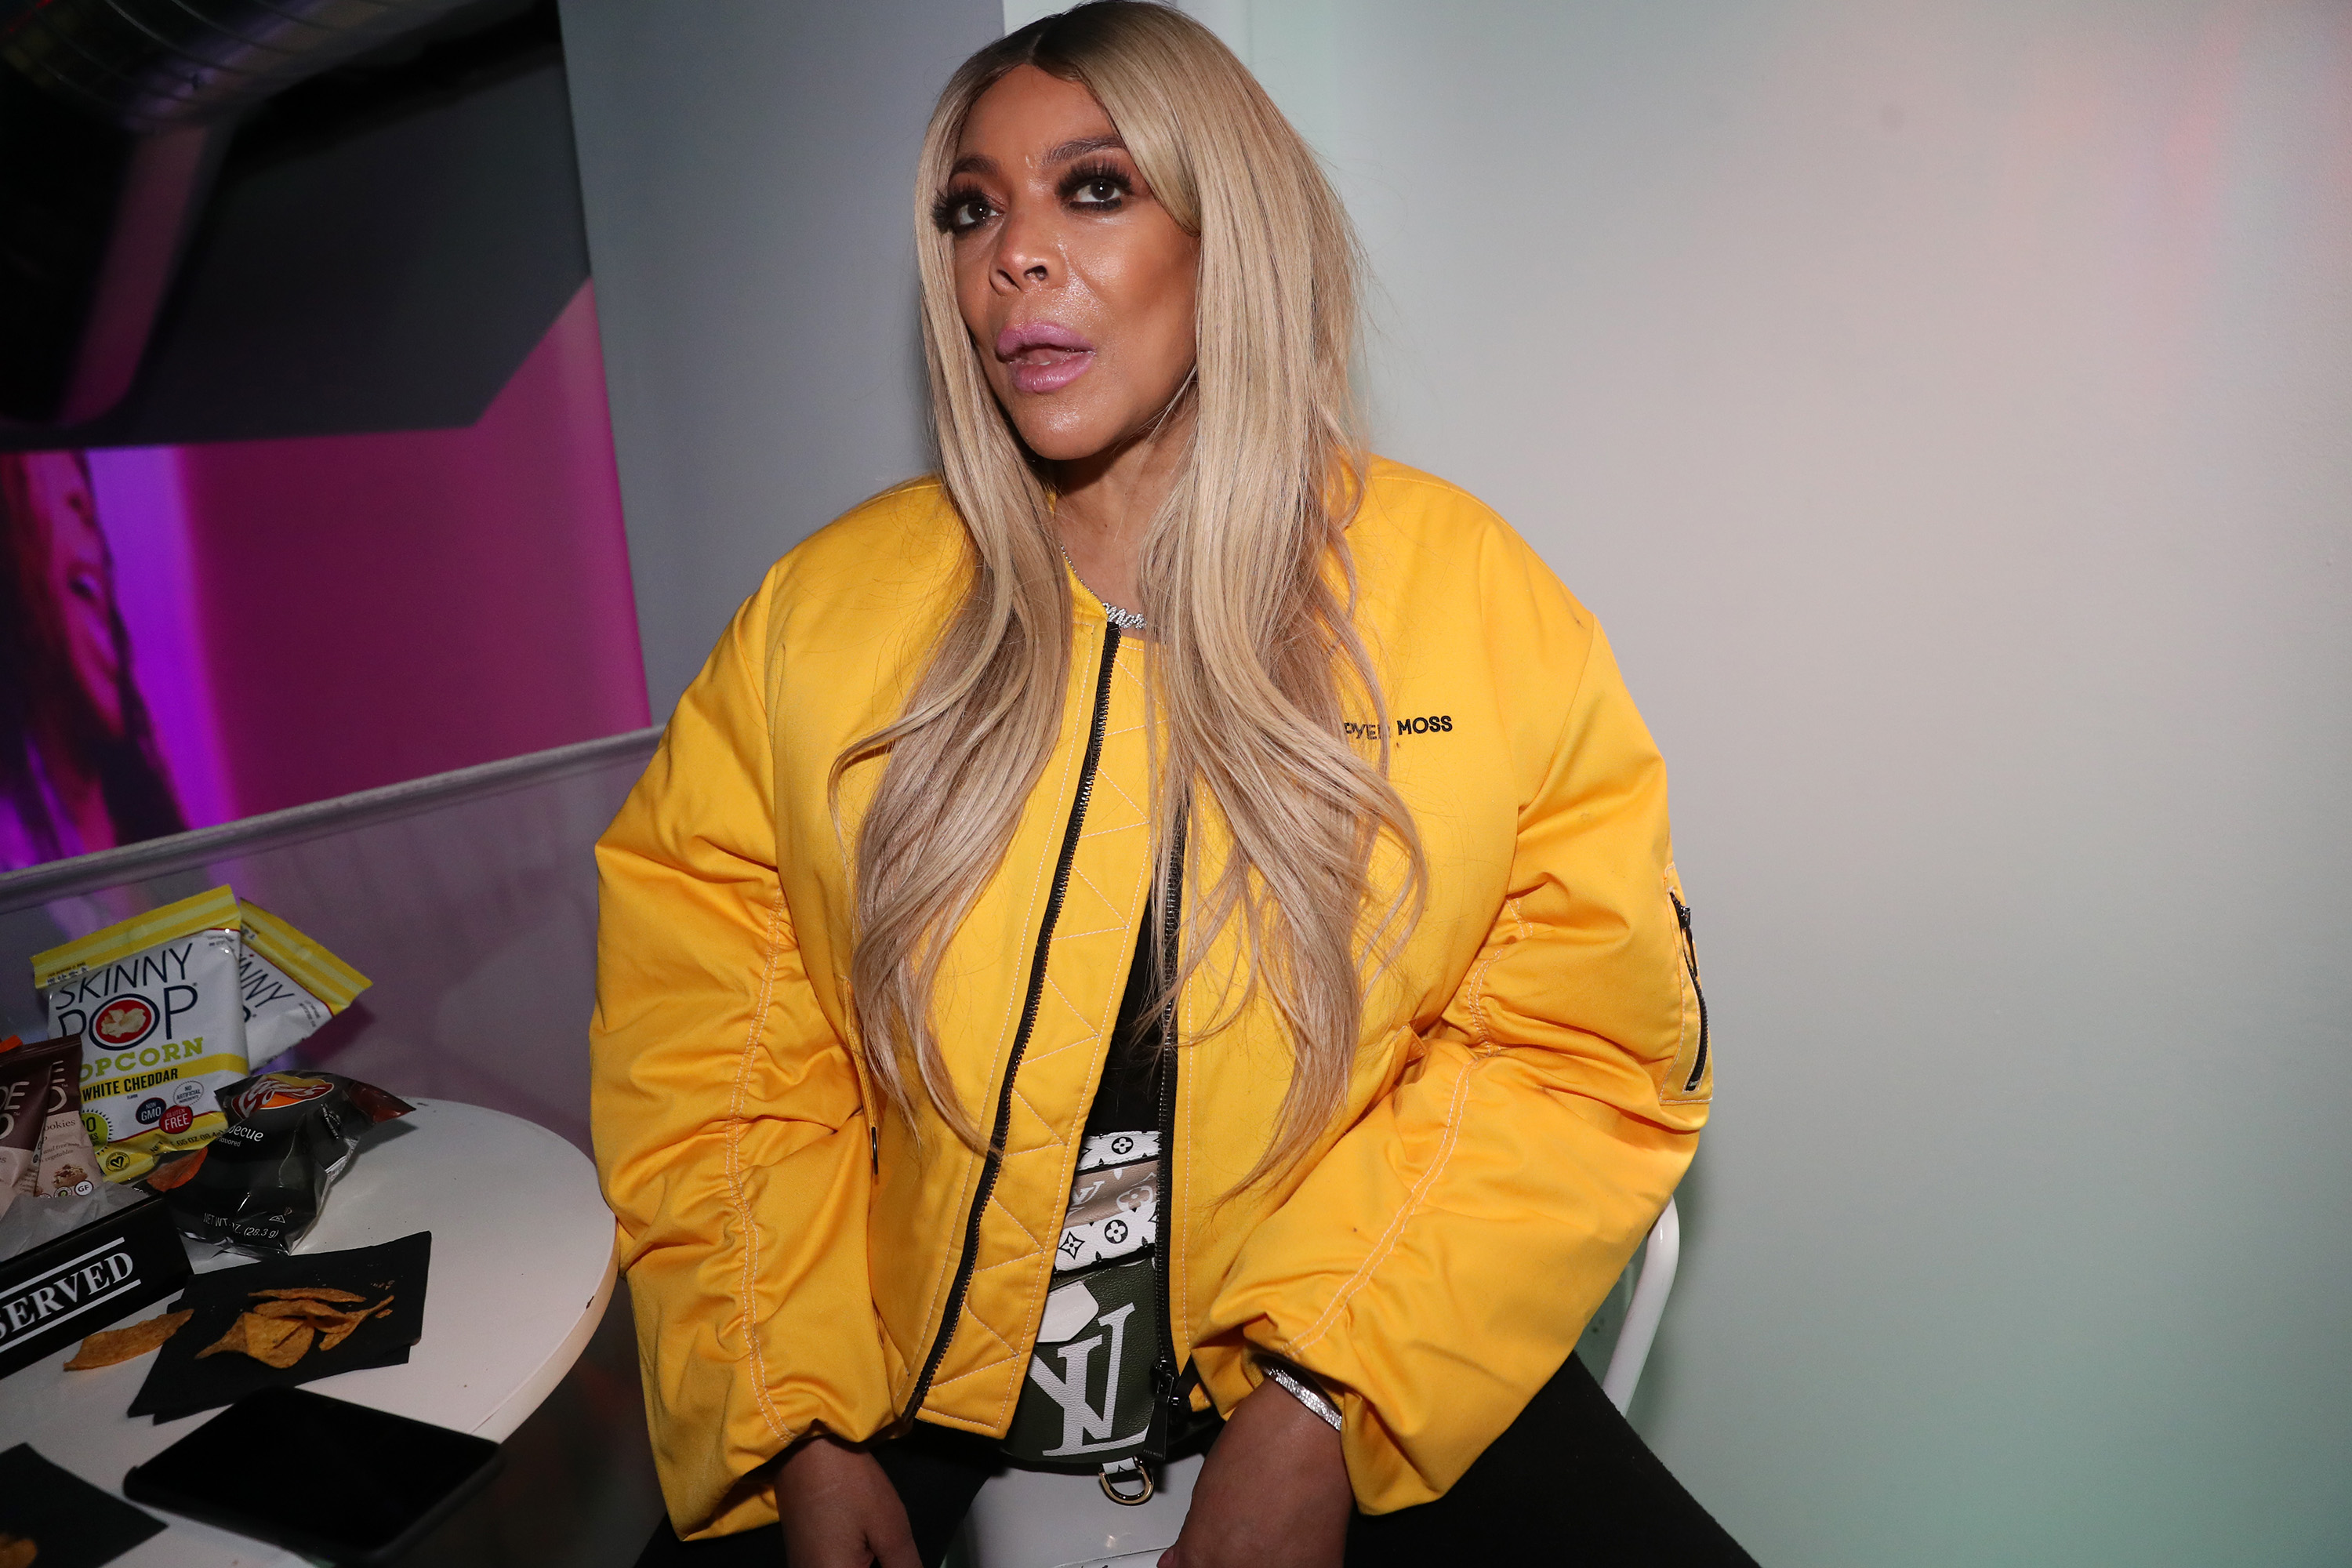 Wendy Williams attends the "New Cash Order" Documentary Screening at Lighthouse International Theater in New York City, on February 20, 2020. | Source: Getty Images